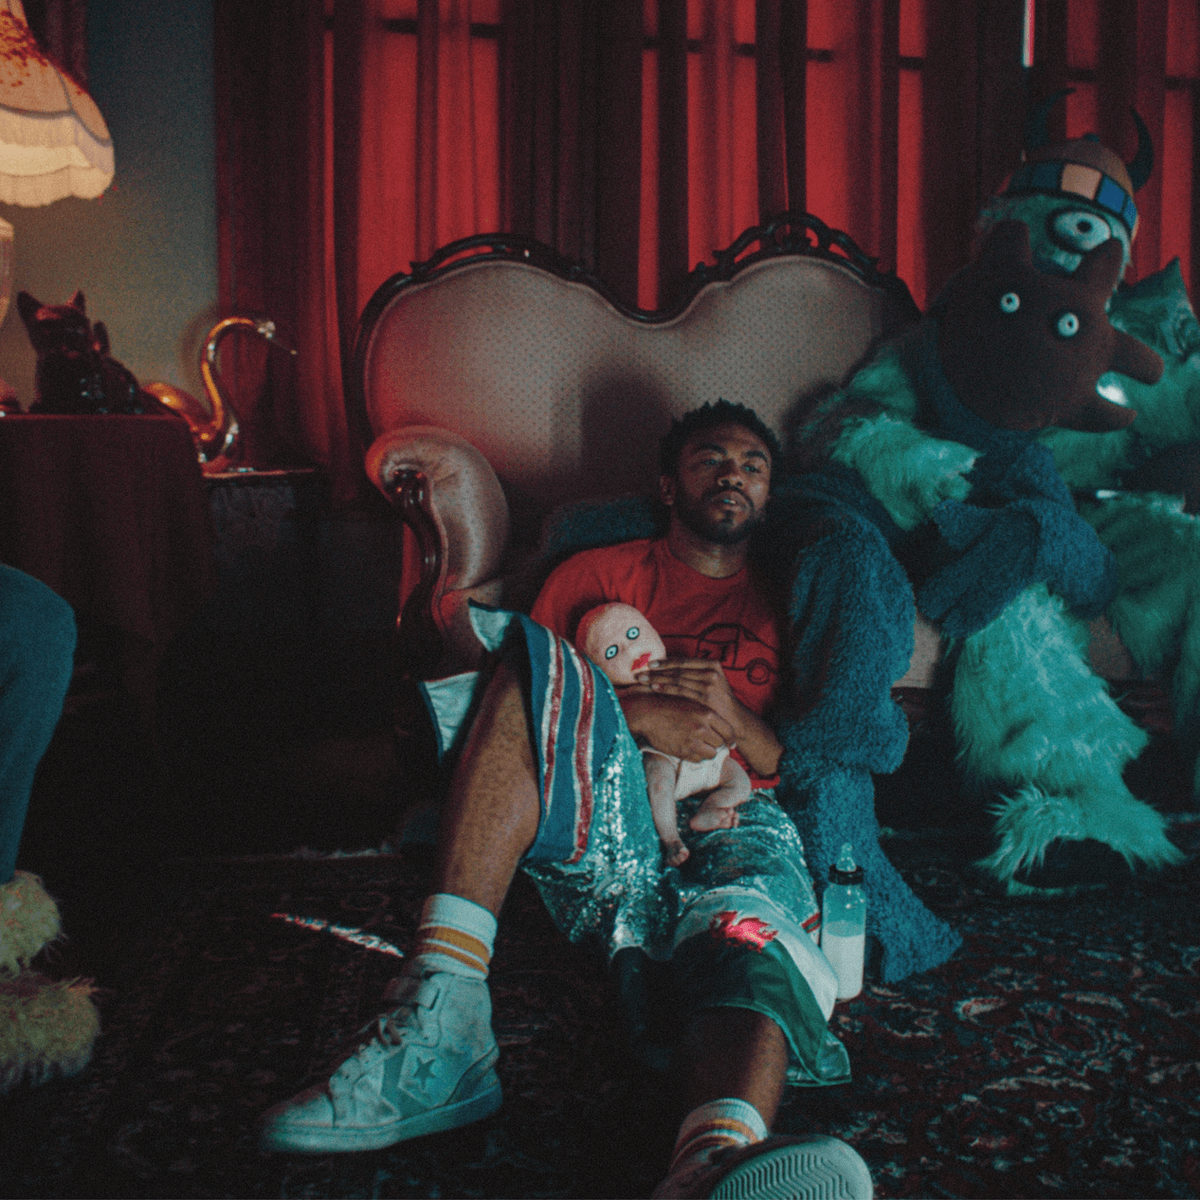 Kevin Abstract Returns With New Single + Video "Blanket"